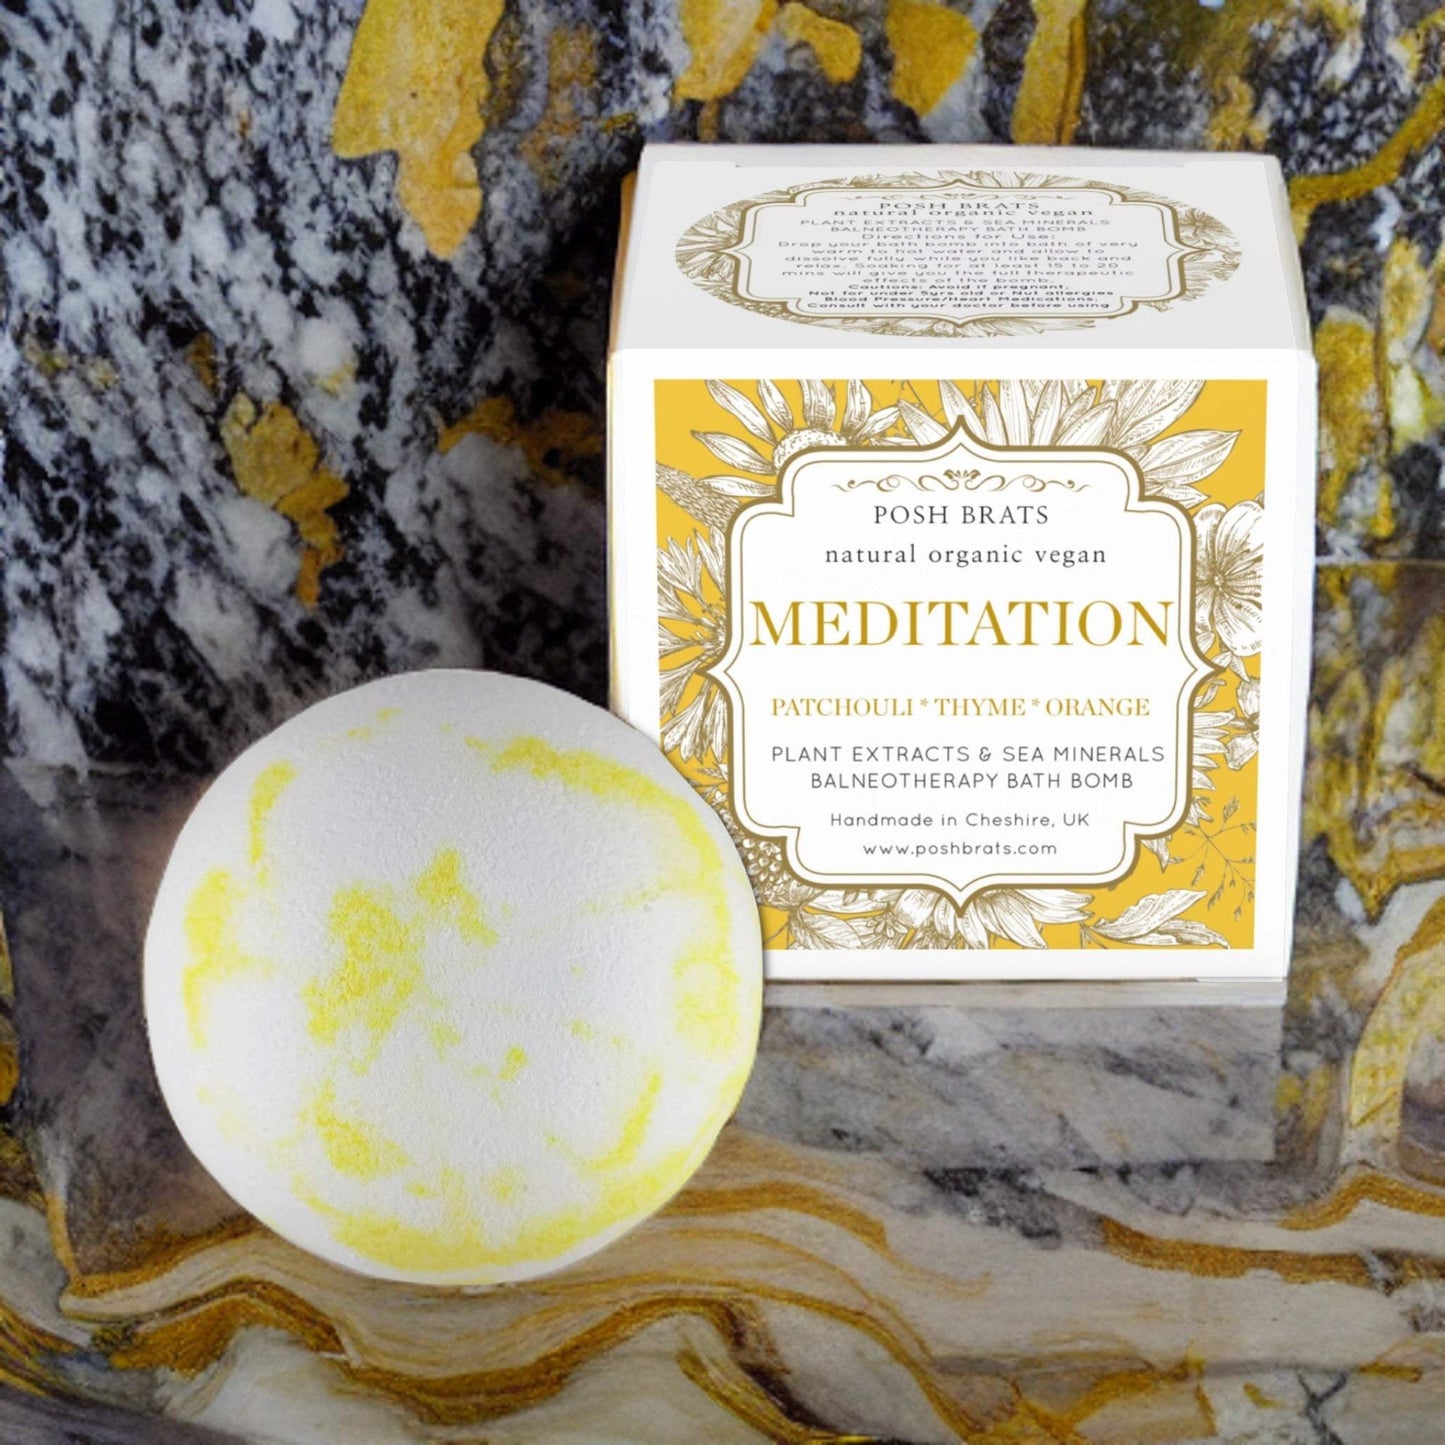 Unwind and relax with our Meditation Aromatherapy Bath Bomb. The soothing scent of orange patchouli awaits you.